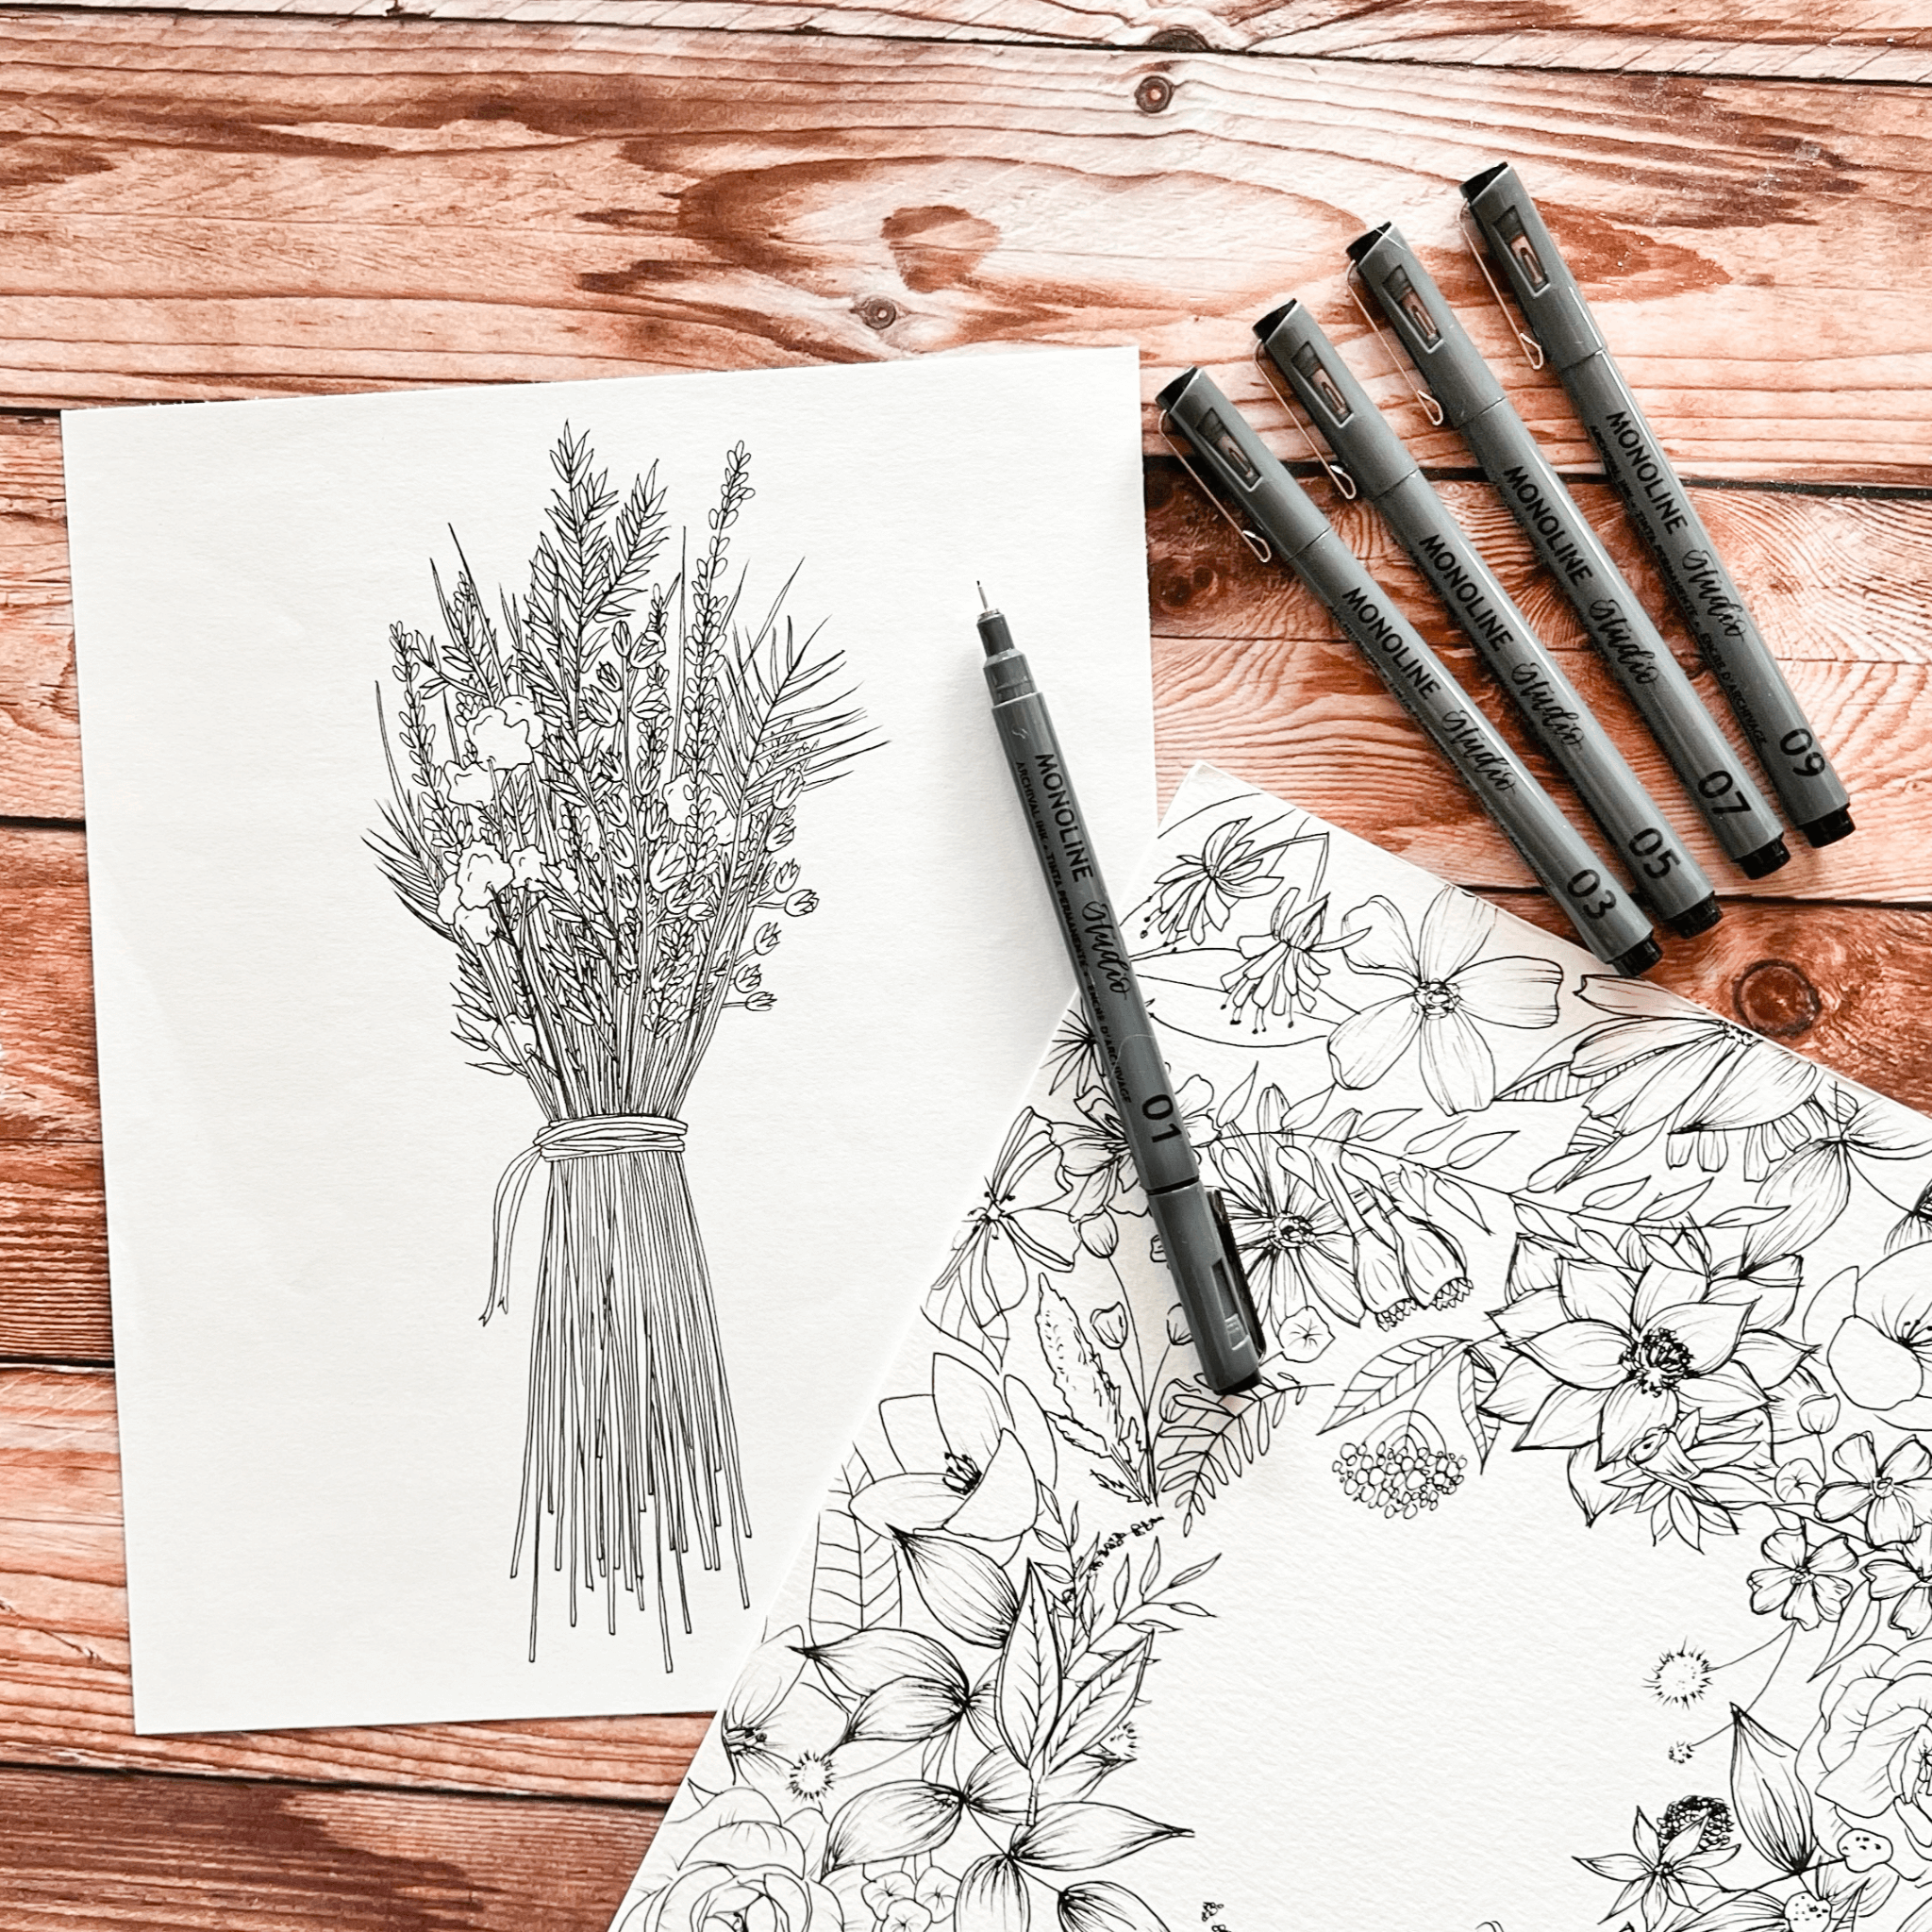 Micron pens are one of the best drawing pens in the market today.